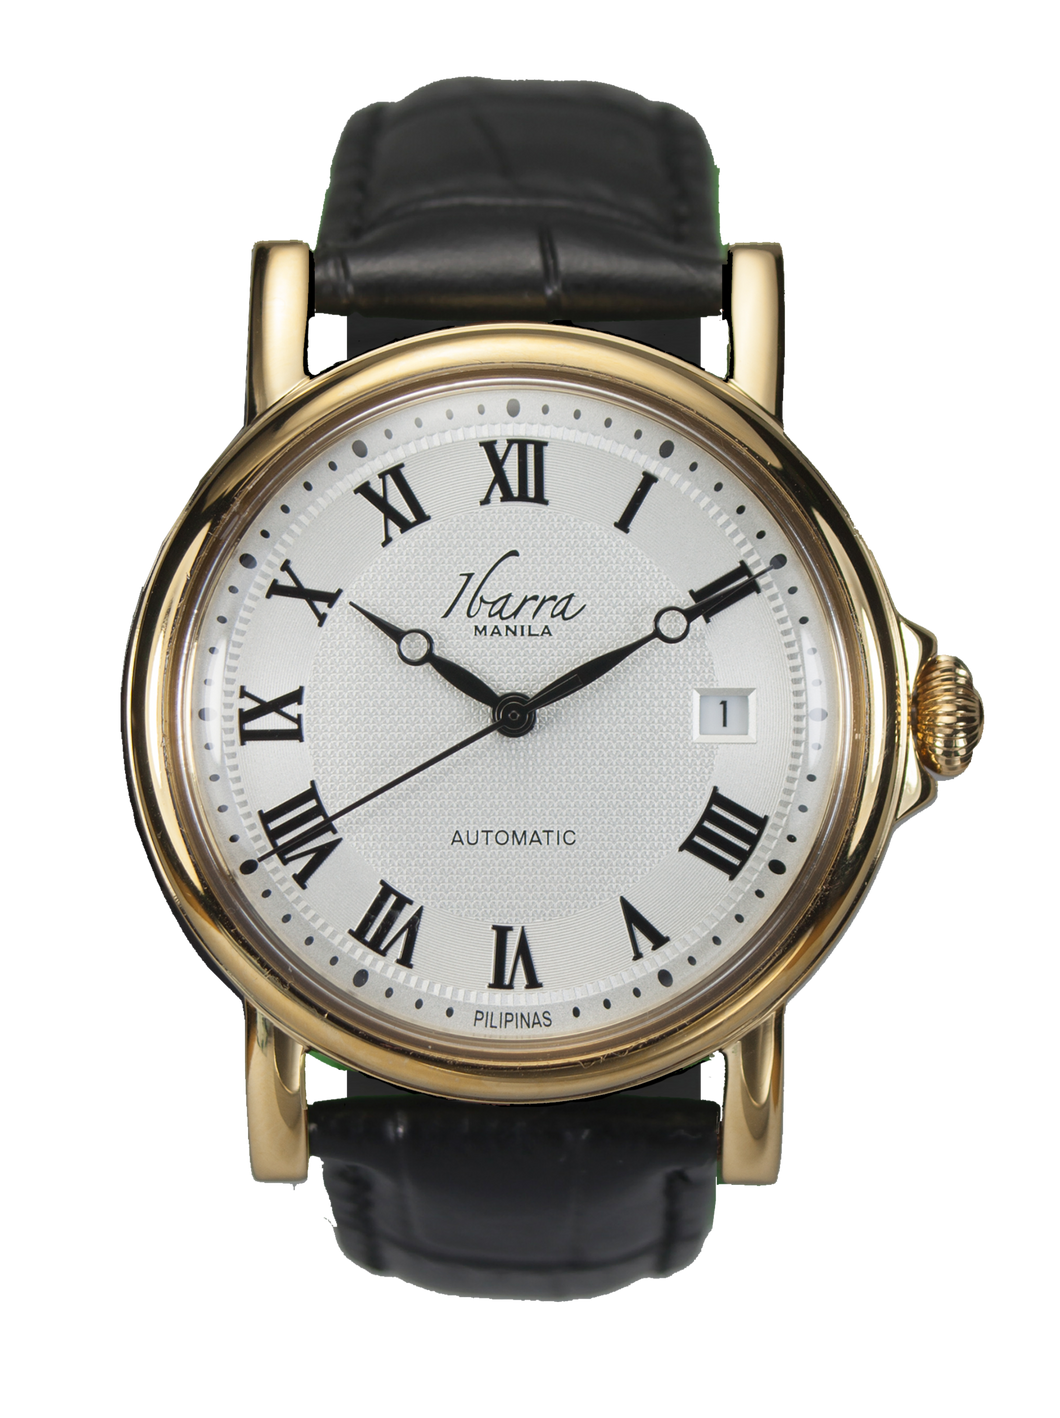 MARIANO (GOLD) 38MM AUTOMATIC DRESS WATCH (BLACK STRAP)